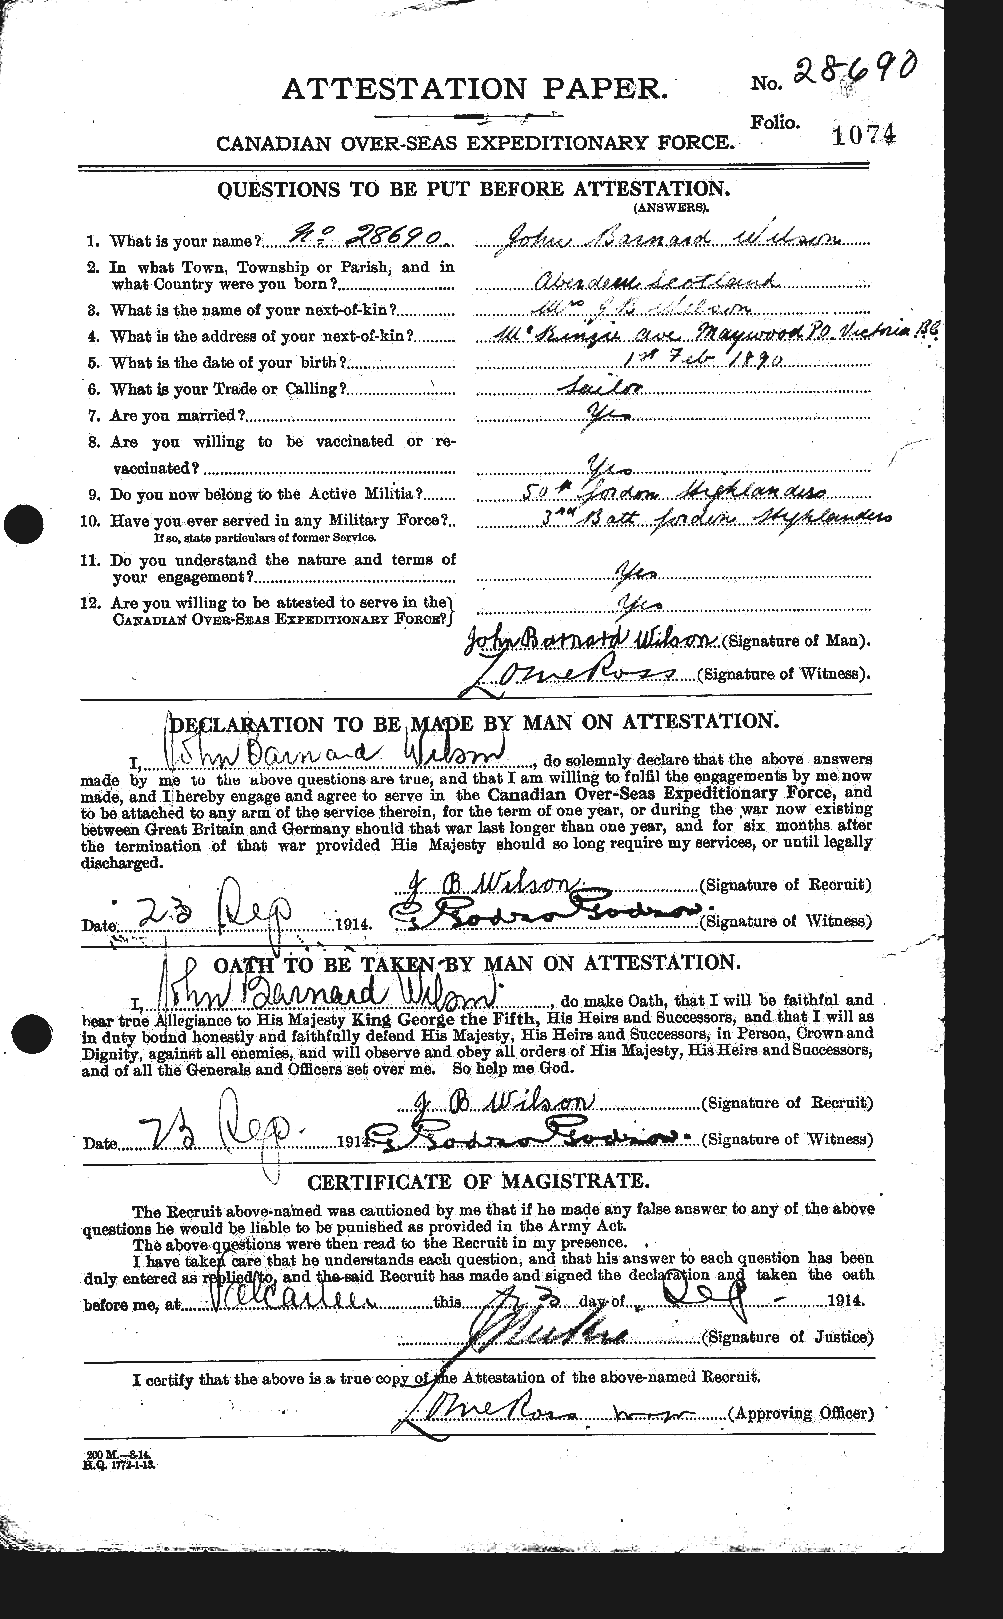 Personnel Records of the First World War - CEF 681669a